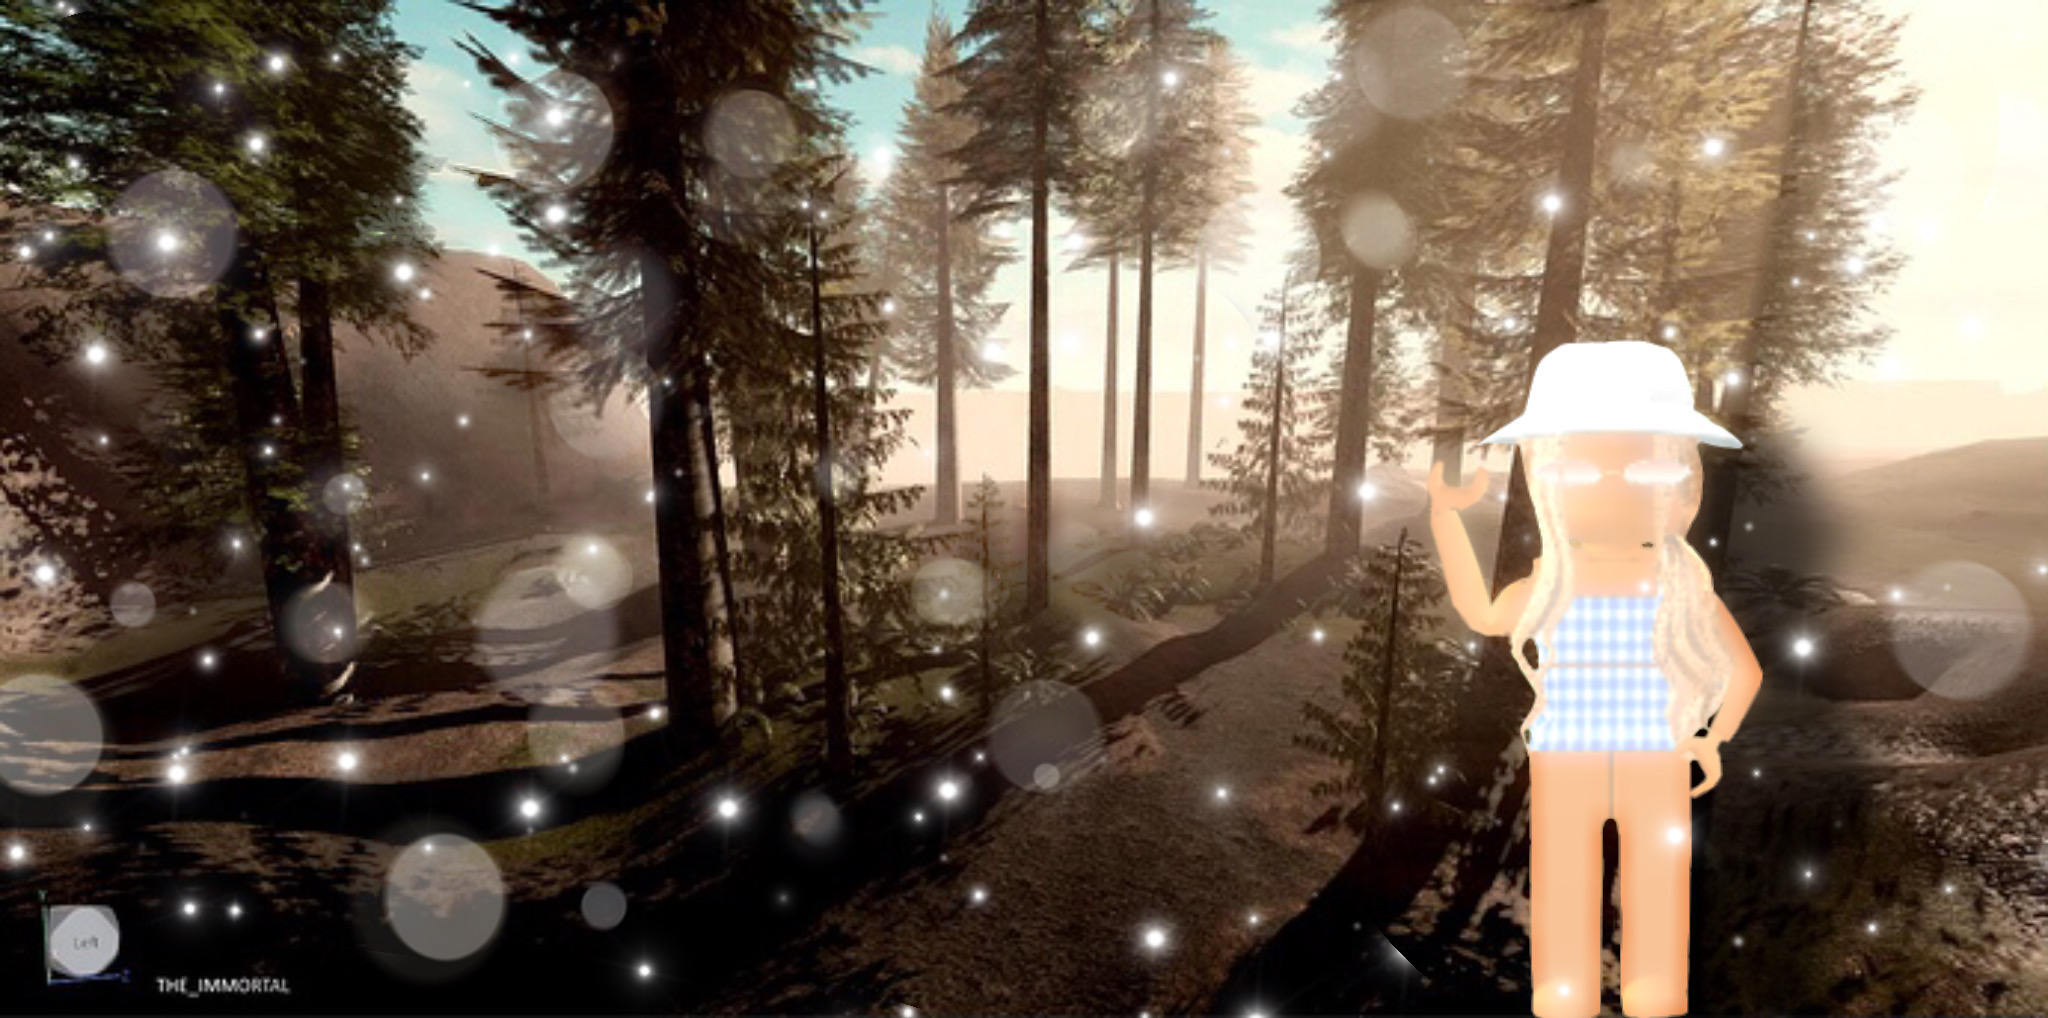 Roblox Gfx Forest Forest Themed Image By Bob - roblox forest picture